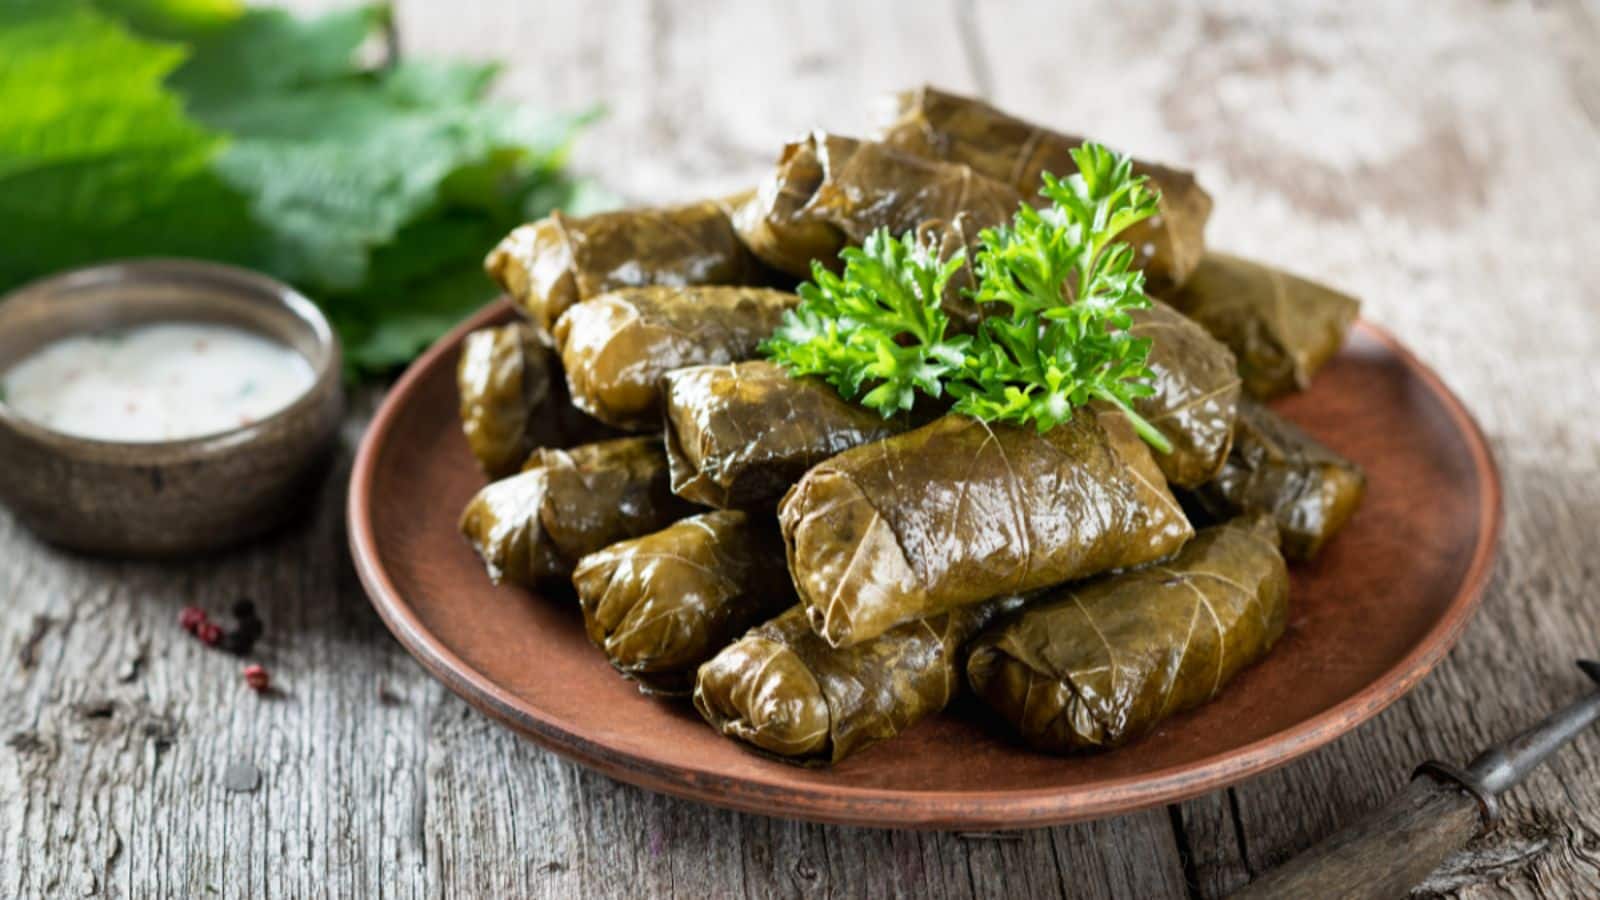 Try this classic Greek dolmades recipe at home